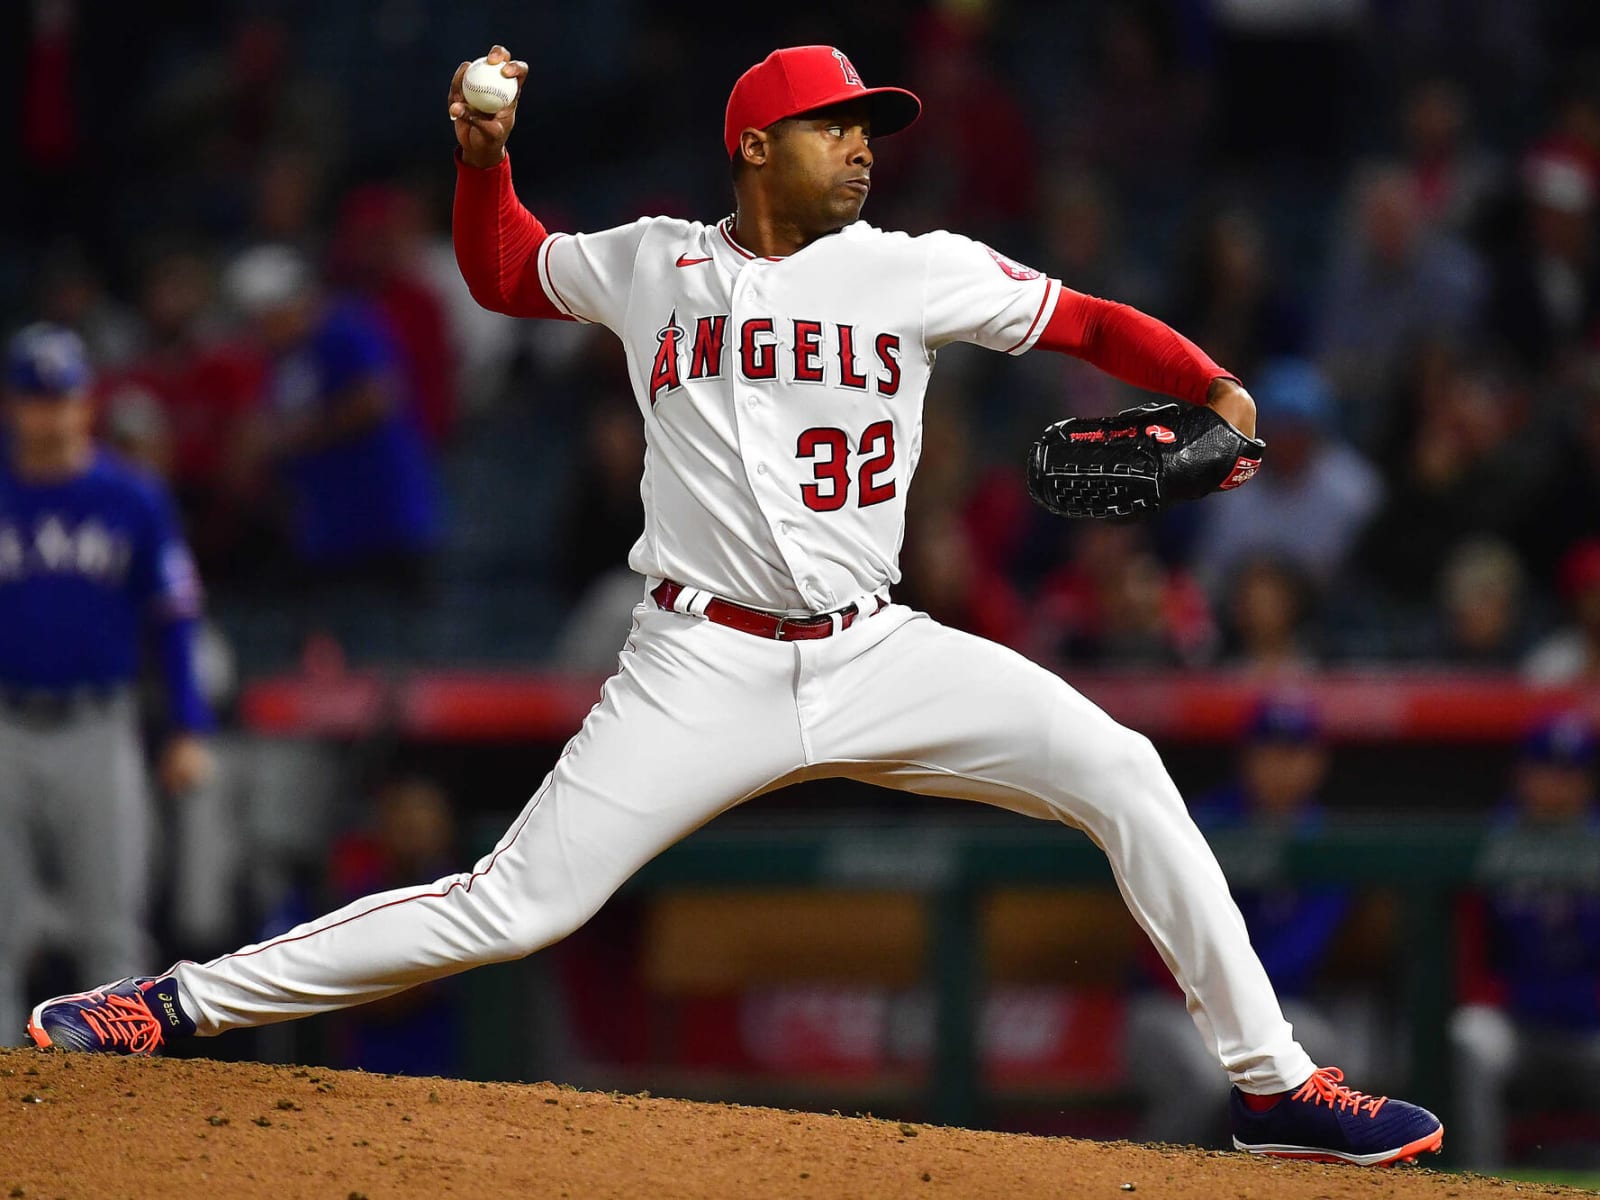 Iglesias double helps the Angels clobber Dodgers - Taipei Times